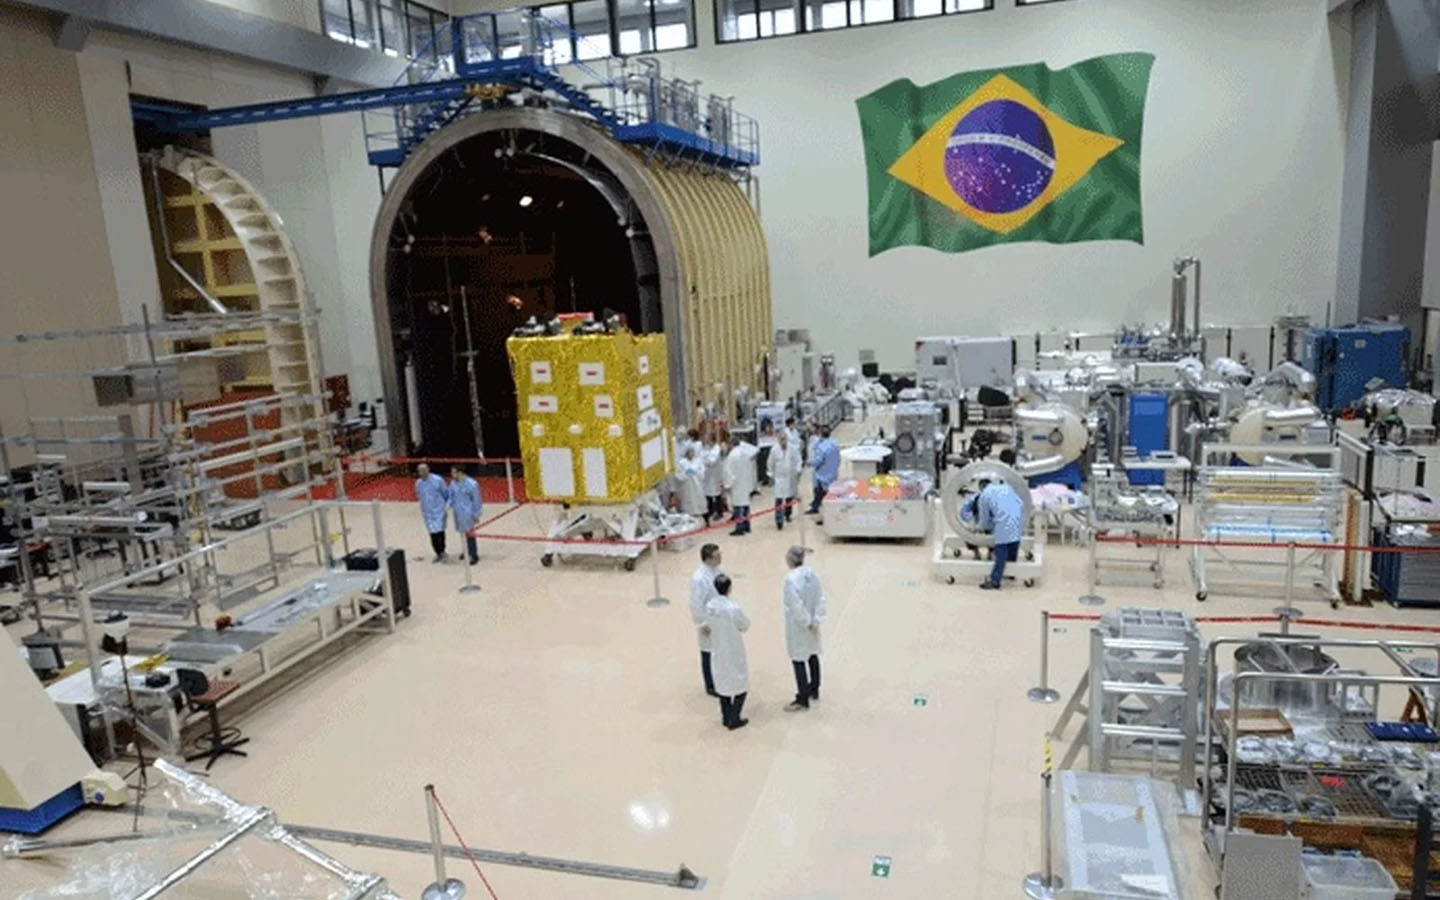 Brazil and China are set to launch a new satellite